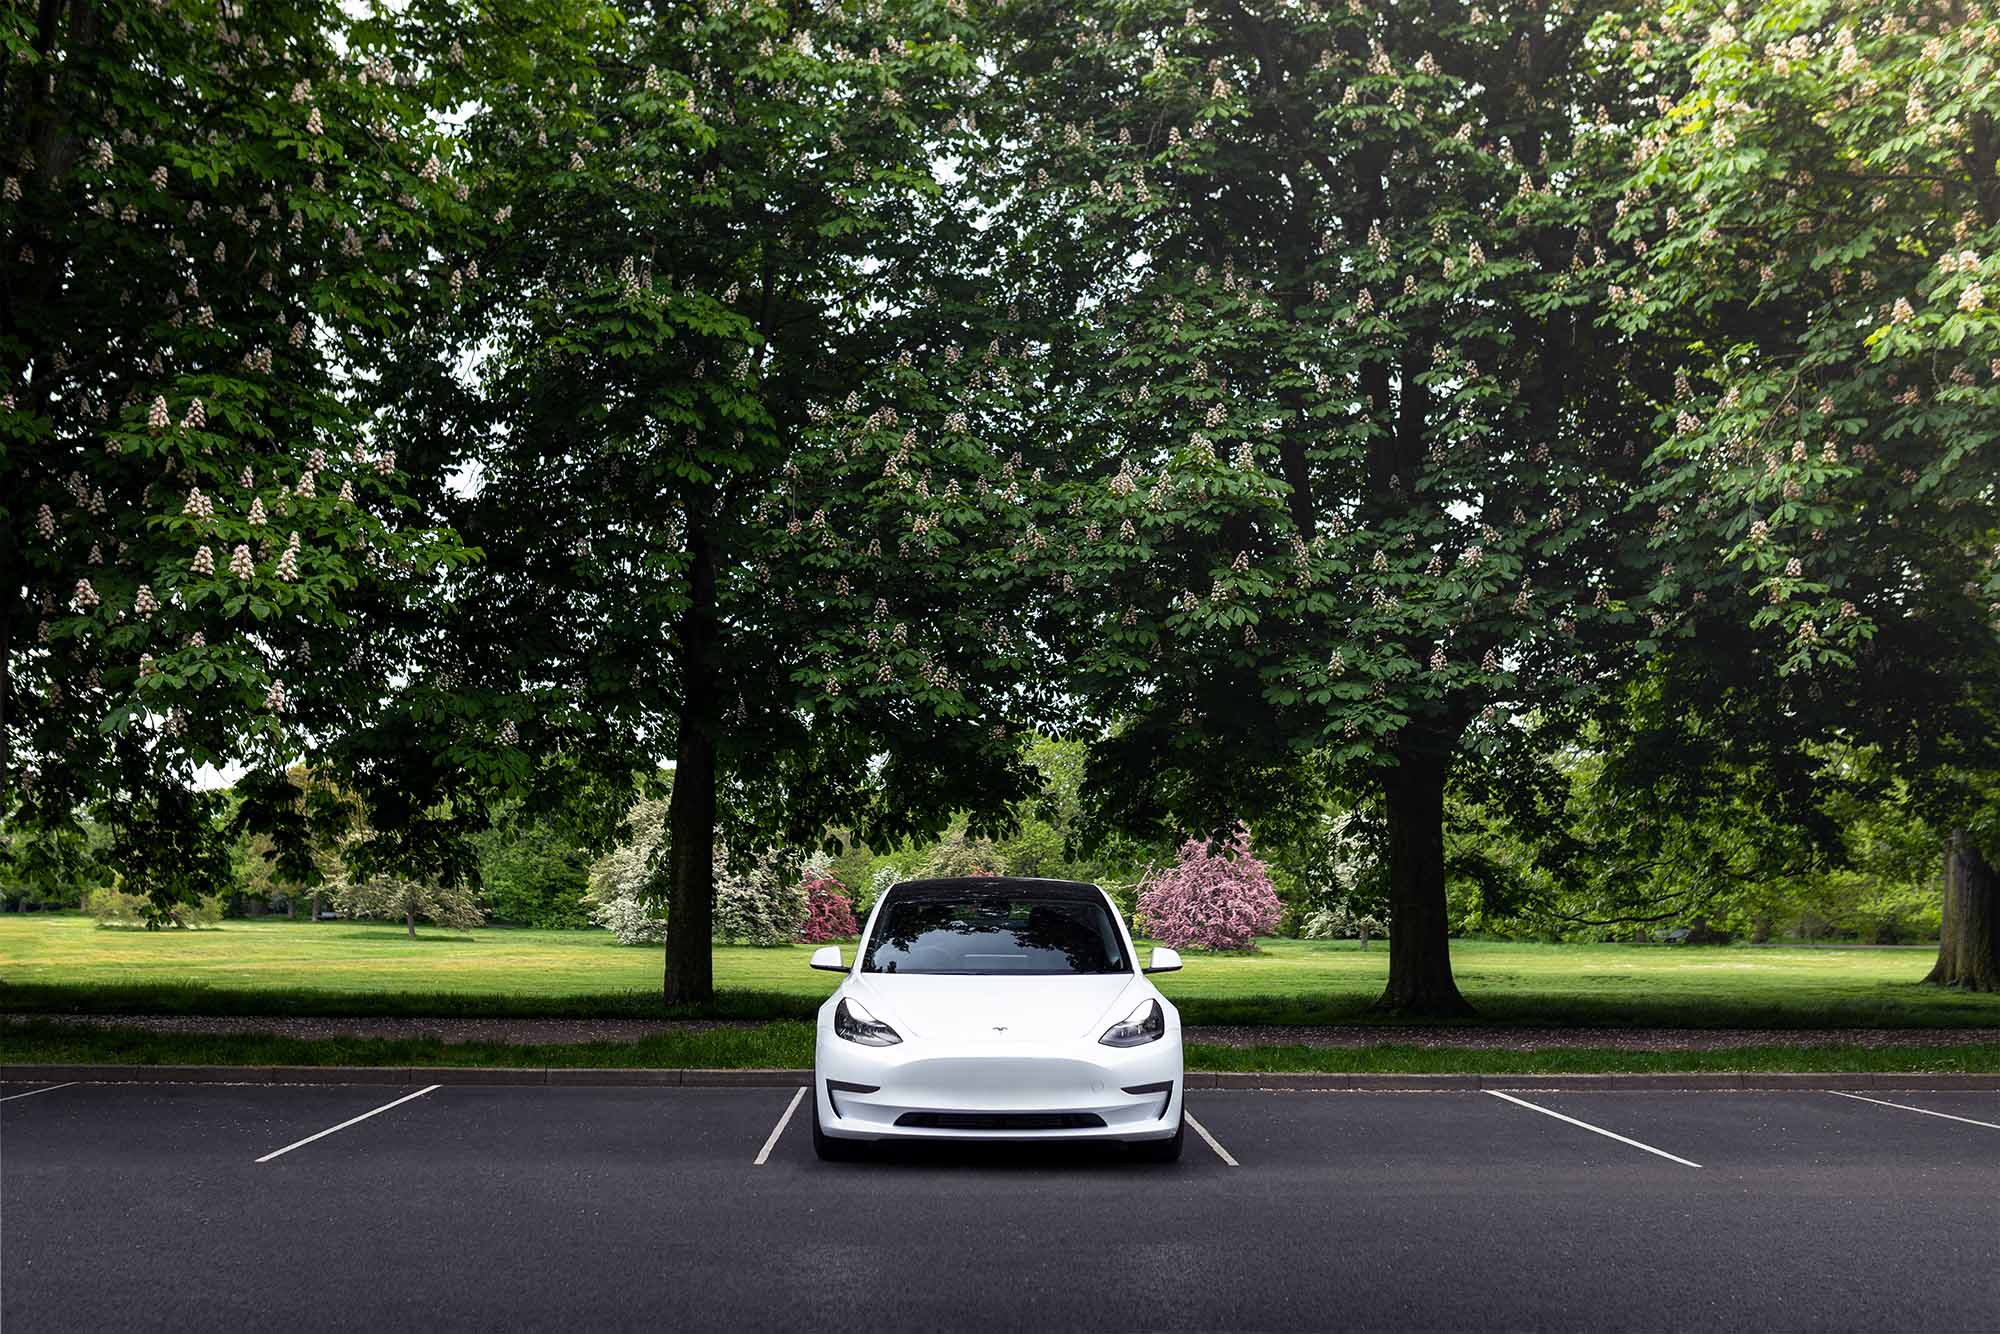 Tesla Model 3 parked in a lot in front of trees